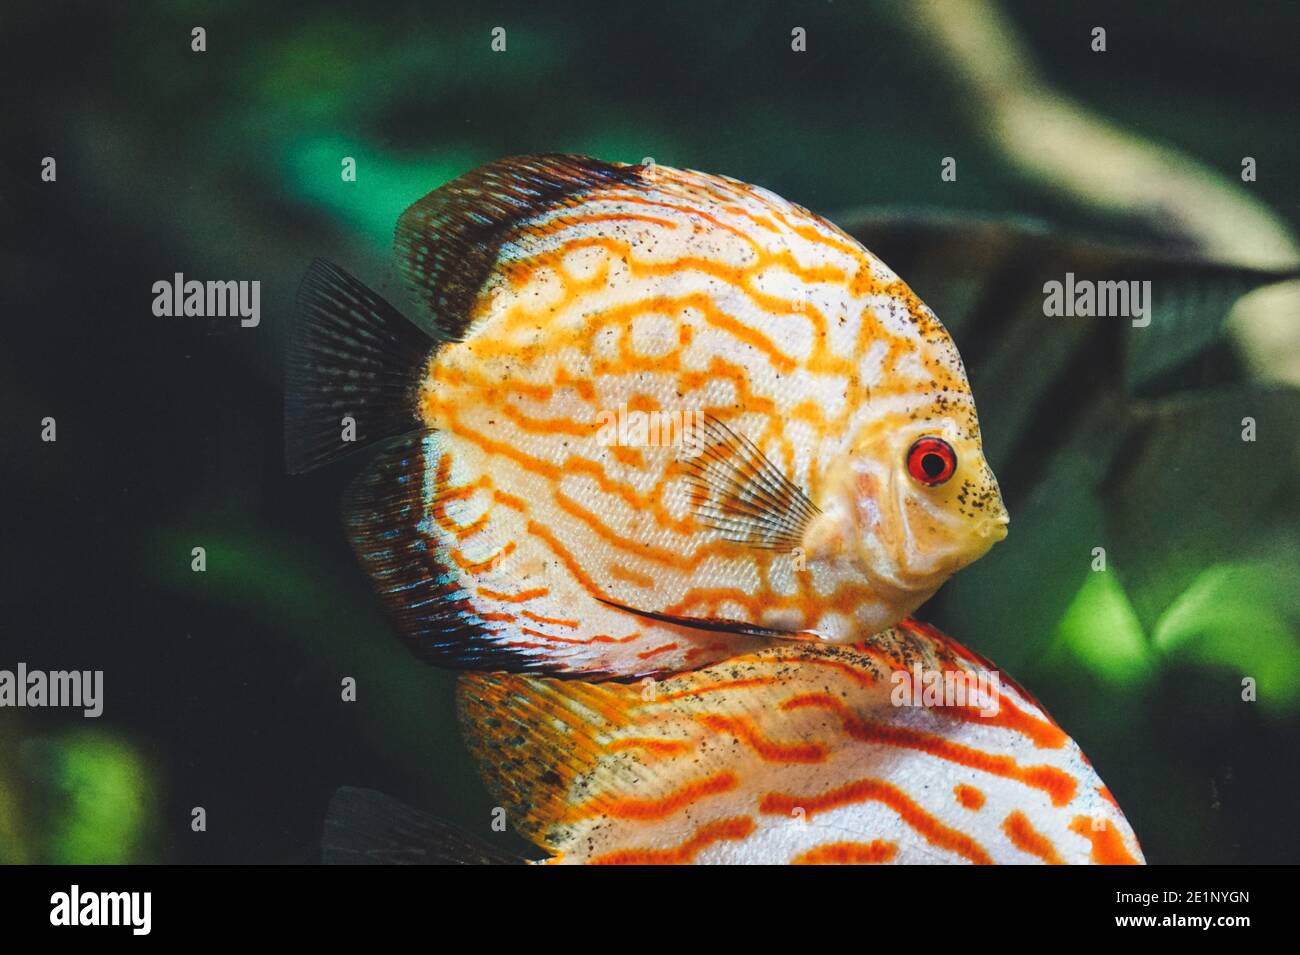 Orange and white discus fish - side view Stock Photo